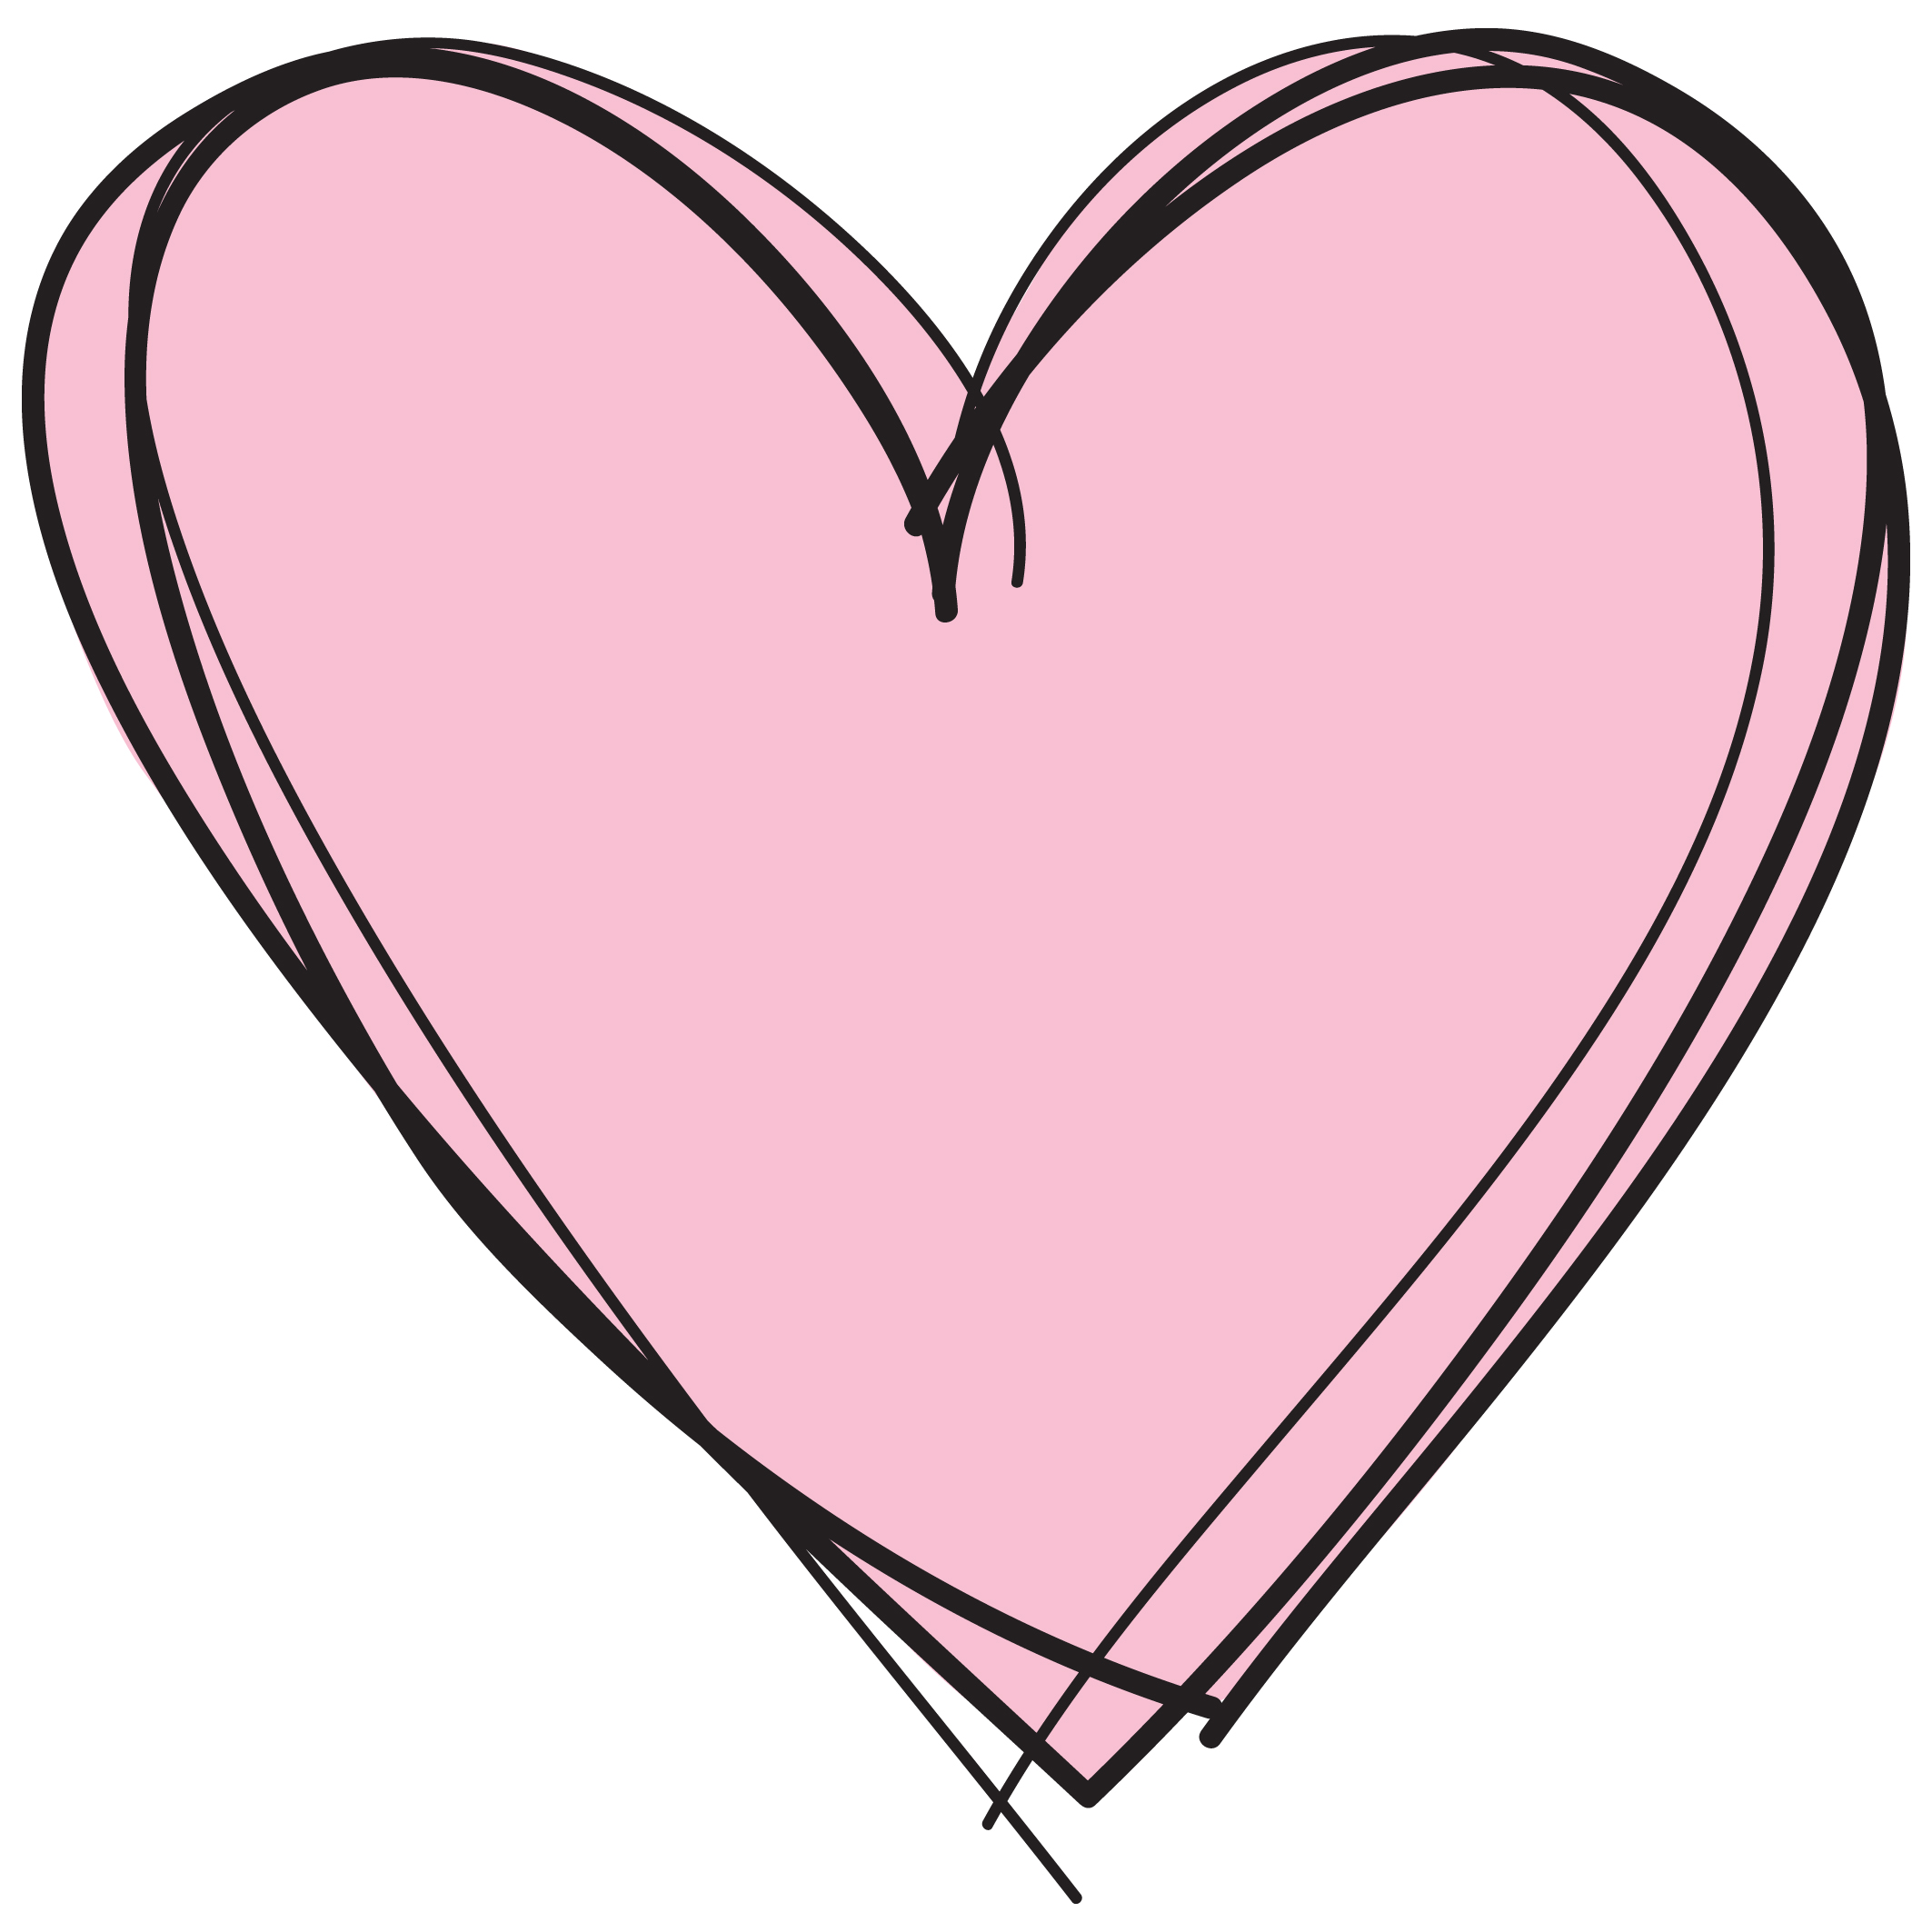 10 Pink Heart Outline Free Cliparts That You Can Download To You